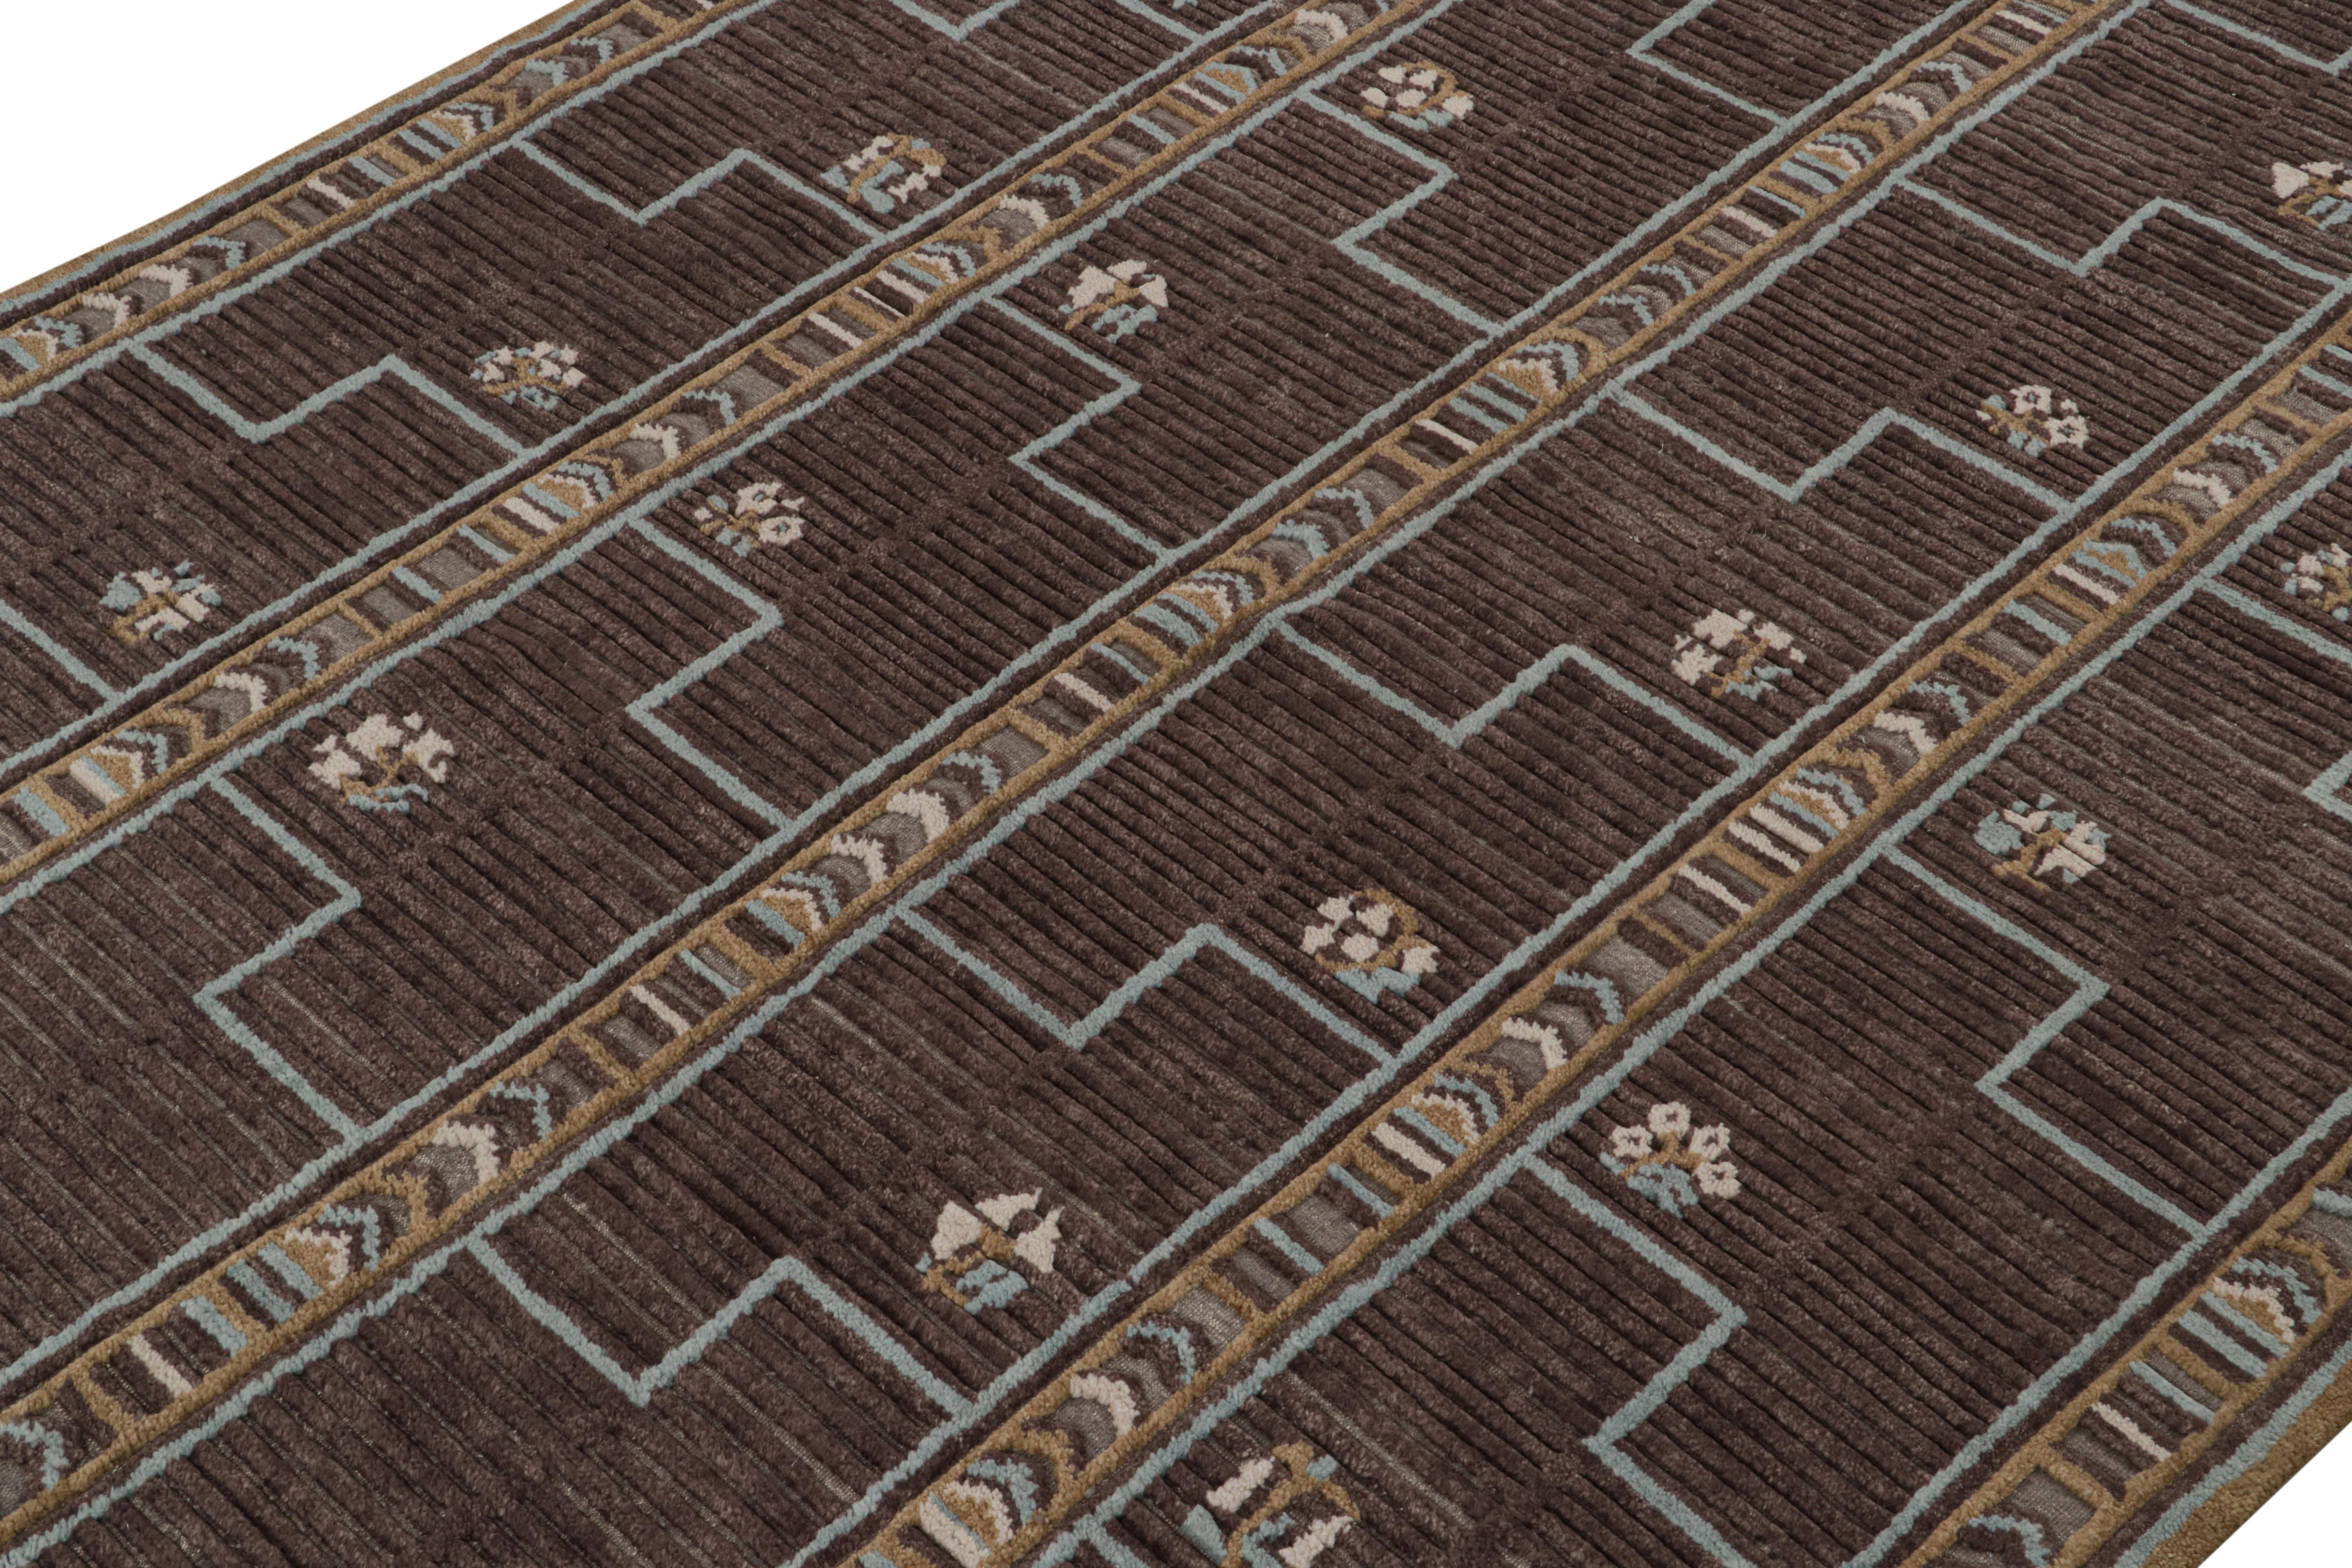 Indian Rug & Kilim’s Scandinavian Style Rug in Brown, Blue & Gold Patterns For Sale